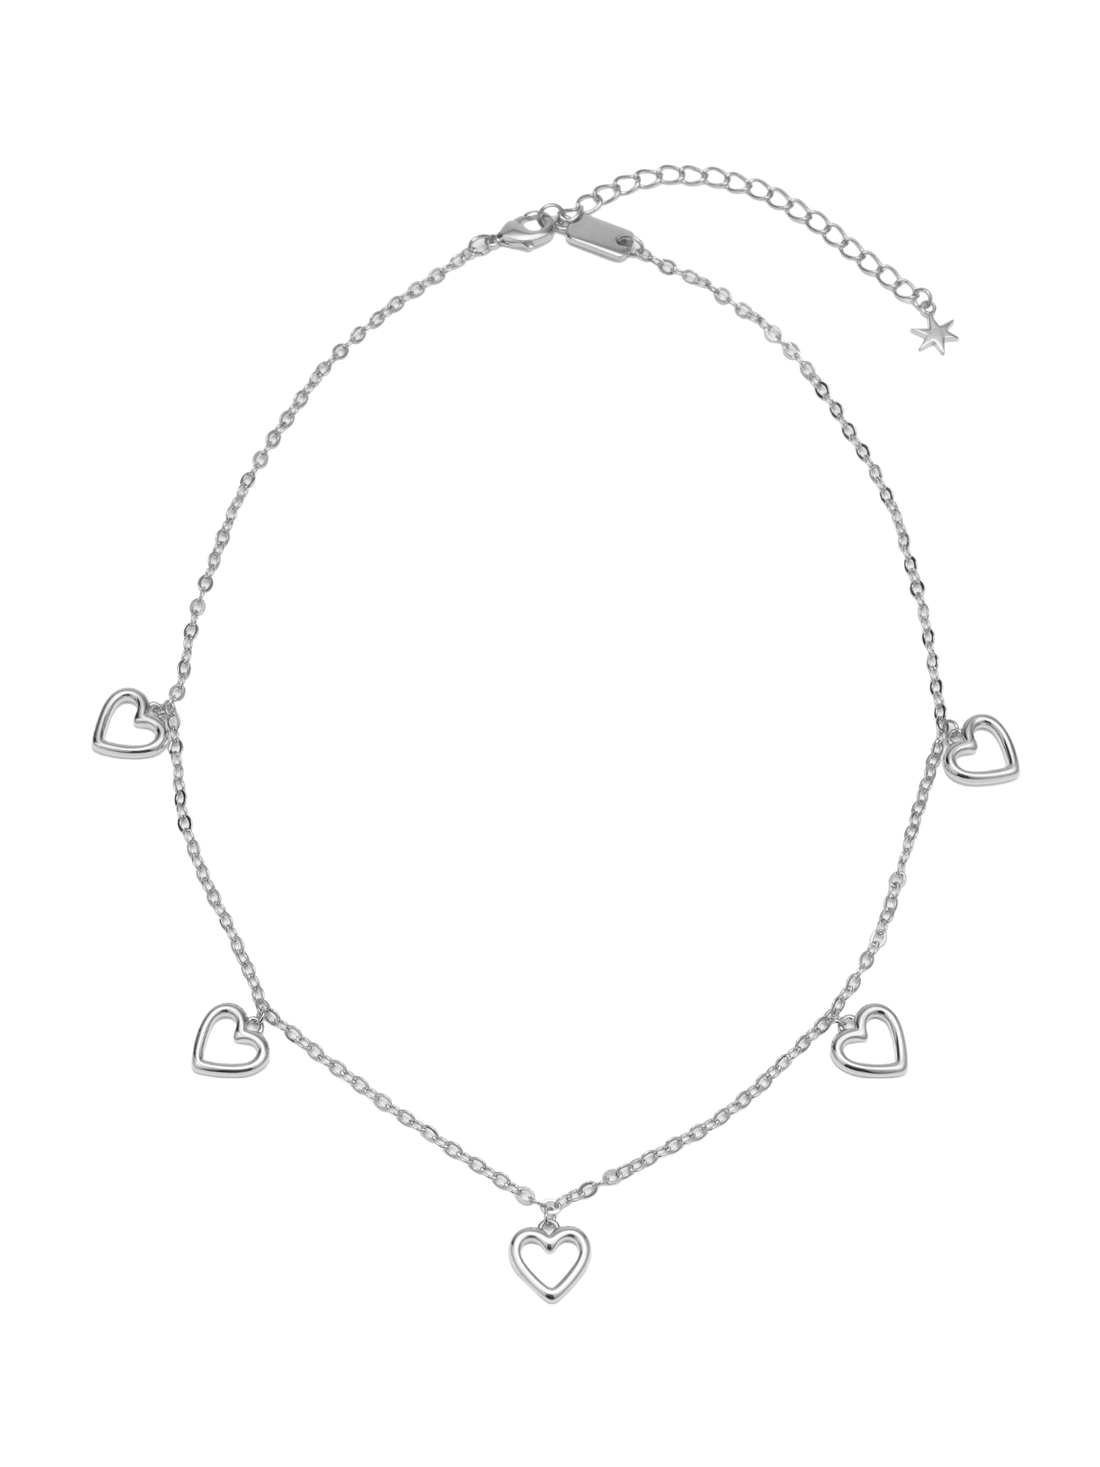 Circle heart necklace